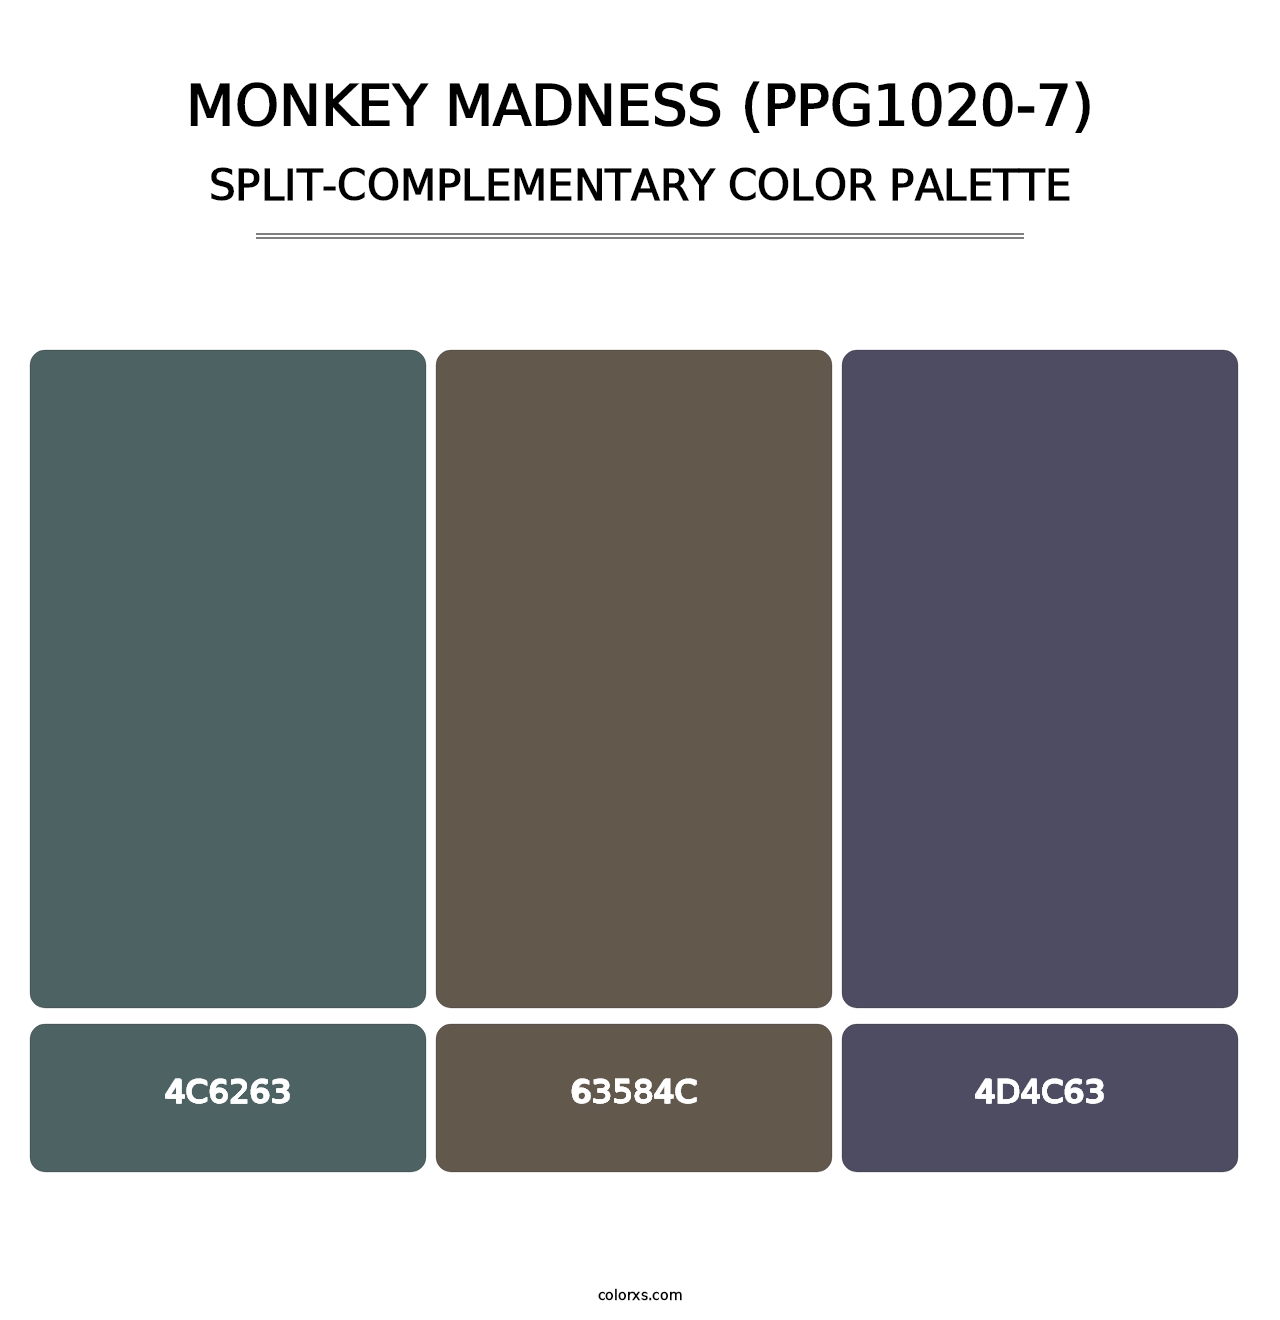 Monkey Madness (PPG1020-7) - Split-Complementary Color Palette